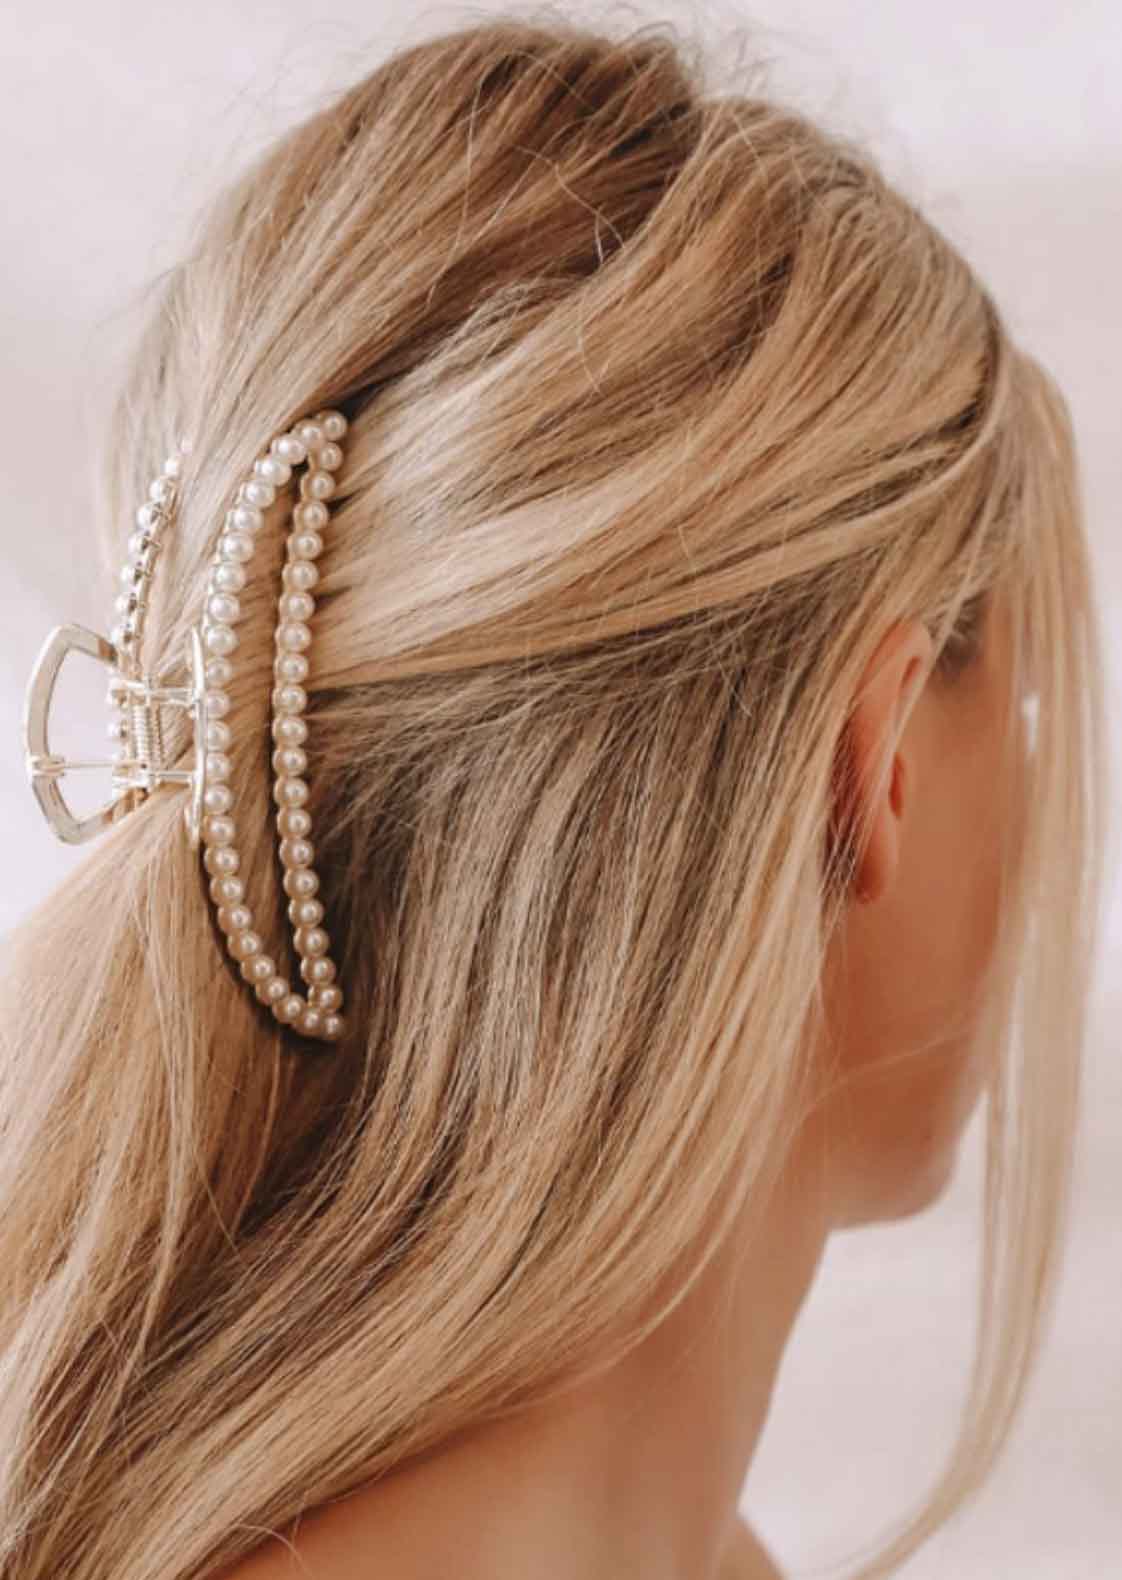 Amazon.com : Ammei Headpiece Crystal Bridal Hair Pins Clips Wedding Hair  Accessories Hair Set Jewelry With Rhinestone For Brides and Bridesmaids Set  Of 12 (Silver) : Beauty & Personal Care